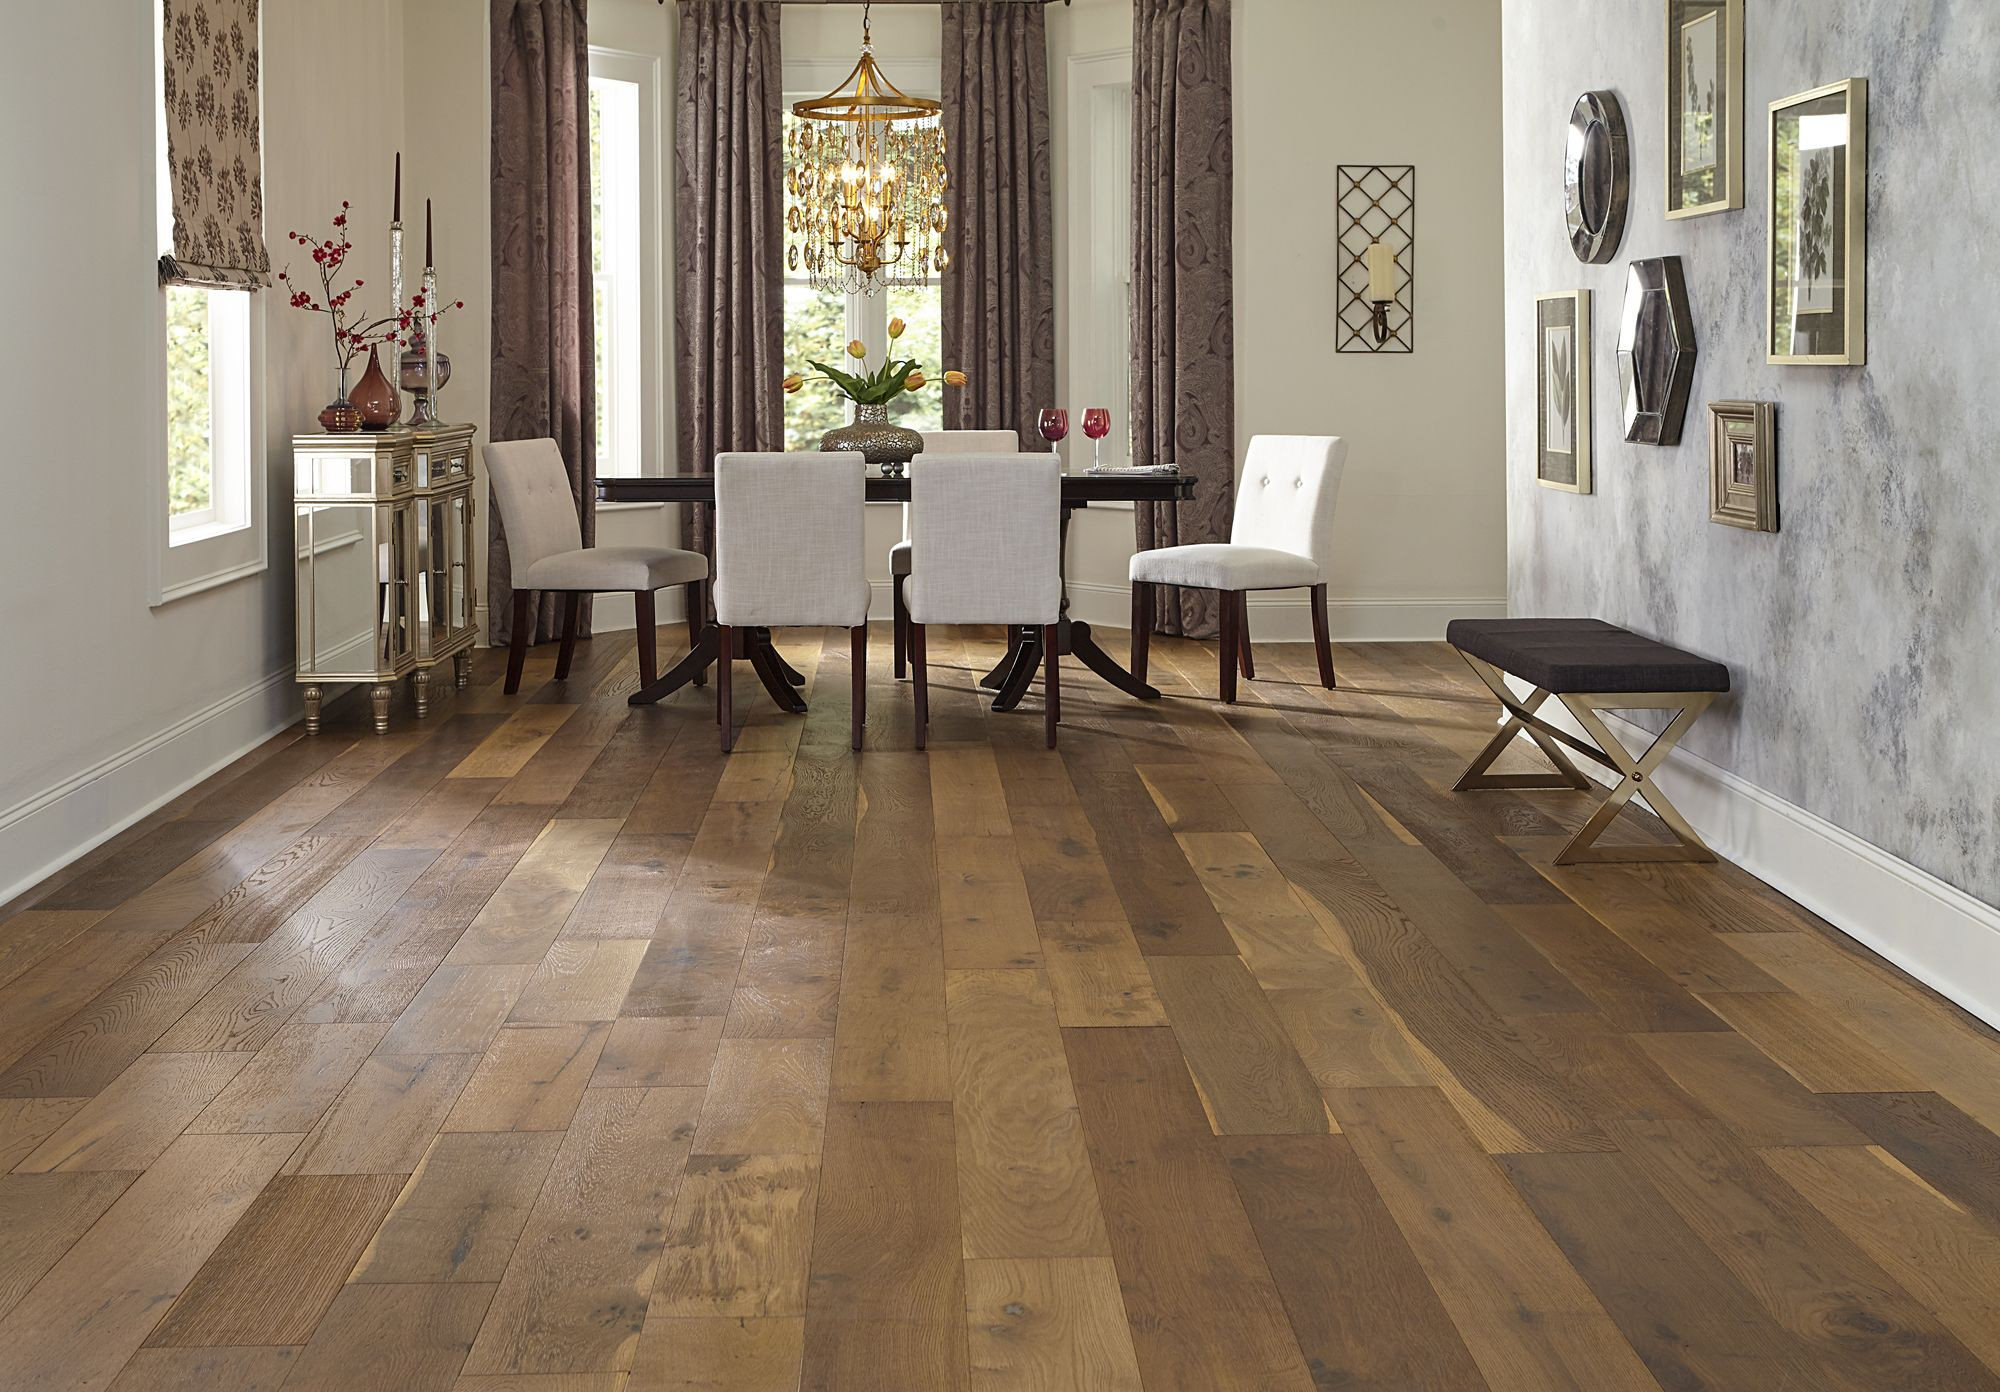 26 Spectacular Hardwood Flooring Ontario Canada 2024 free download hardwood flooring ontario canada of 7 1 2 wide planks and a rustic look bellawood willow manor oak has pertaining to 7 1 2 wide planks and a rustic look bellawood willow manor oak has a stor